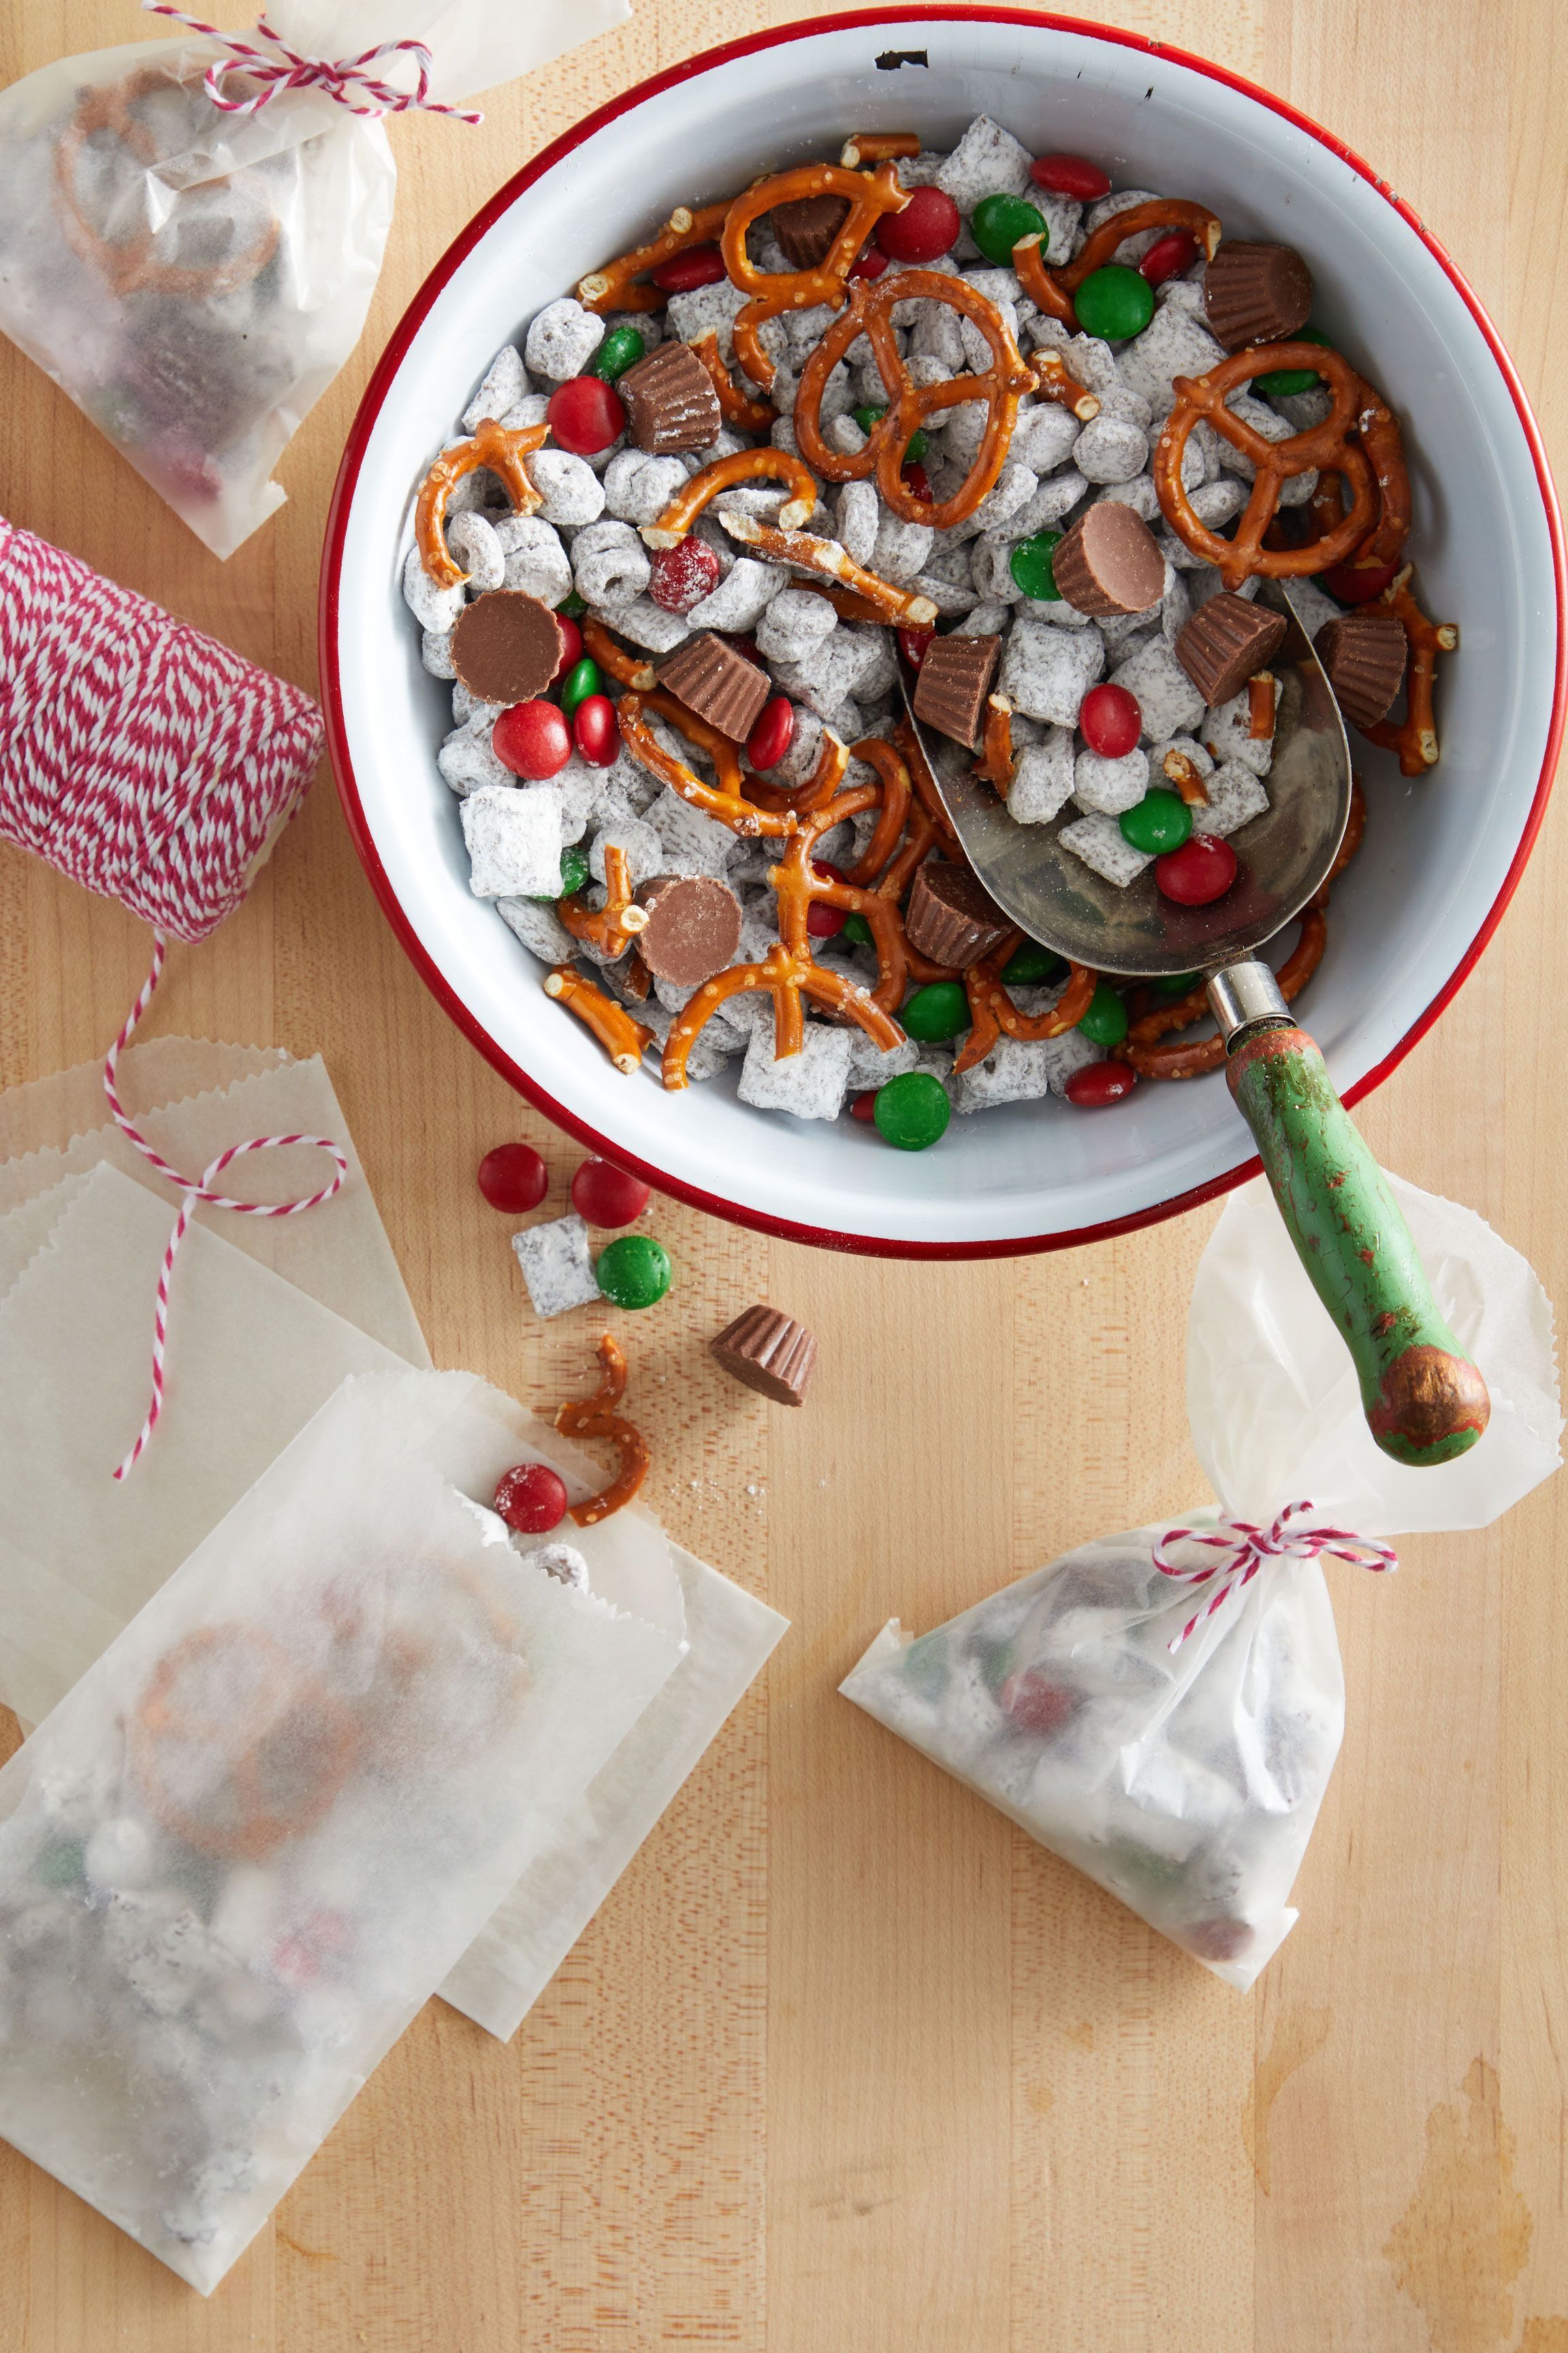 70 Best Christmas Candy Recipes - Homemade Holiday Candy Ideas